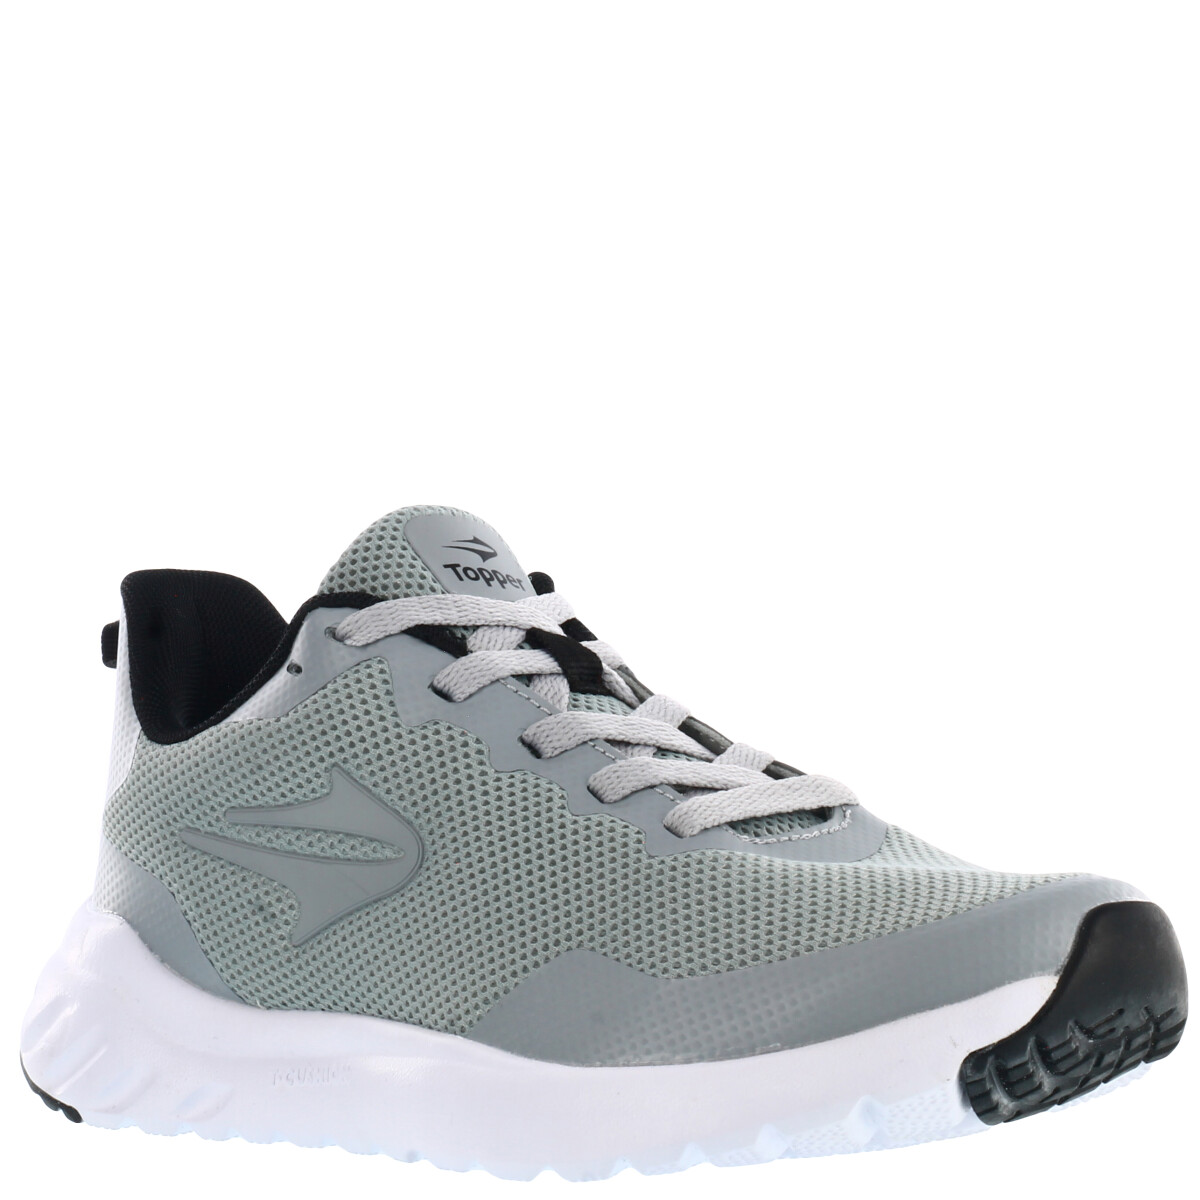 Strong Pace III Mns Topper - Gris/Negro 